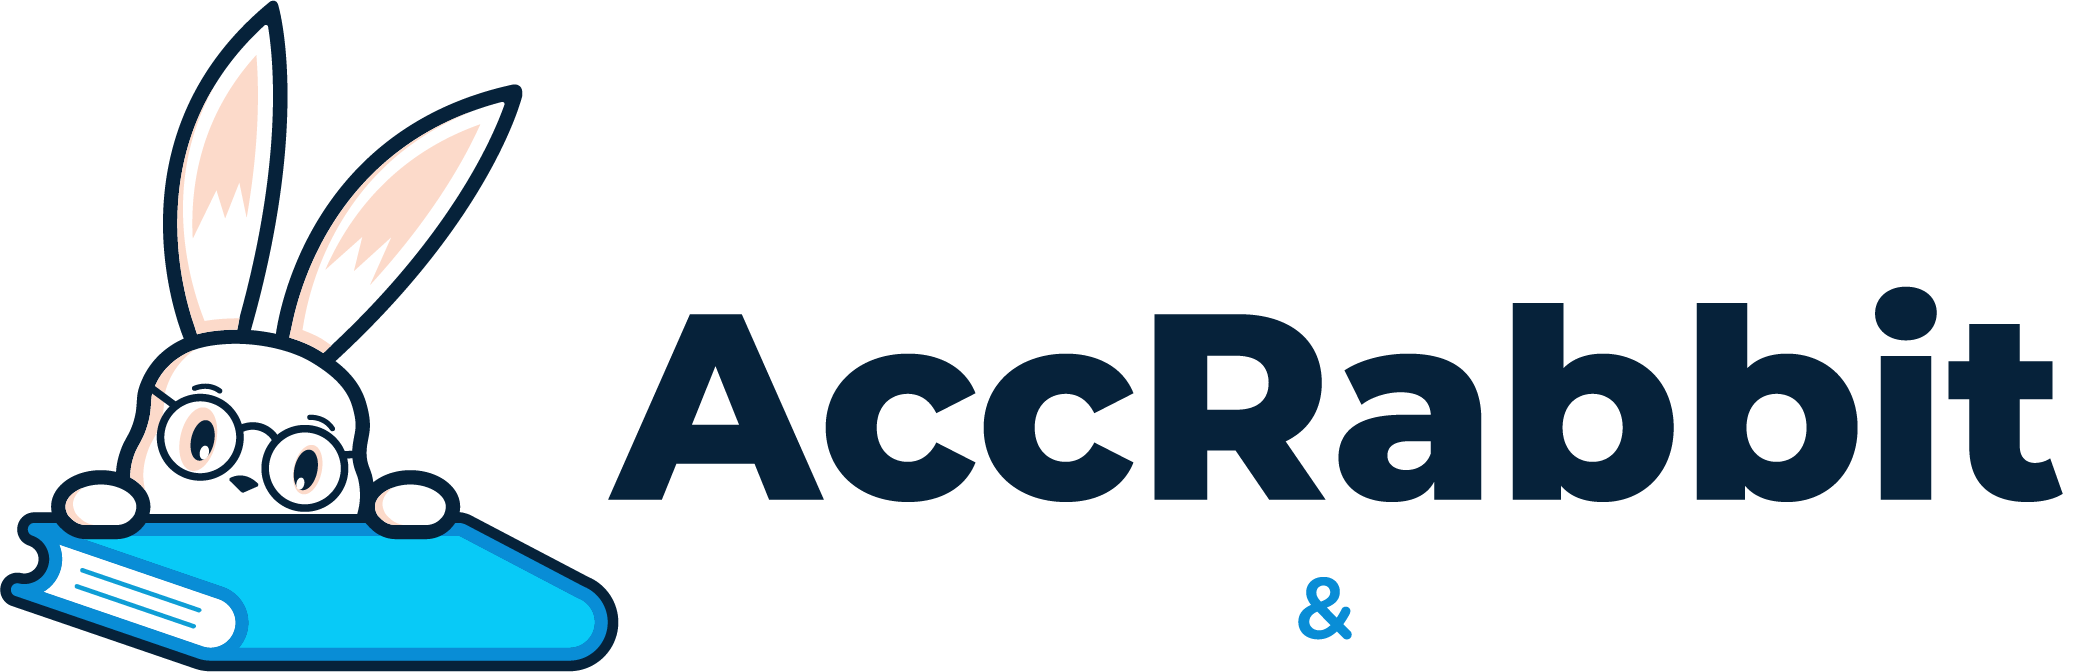 Accounting Rabbit | Accounting and Bookkeeping